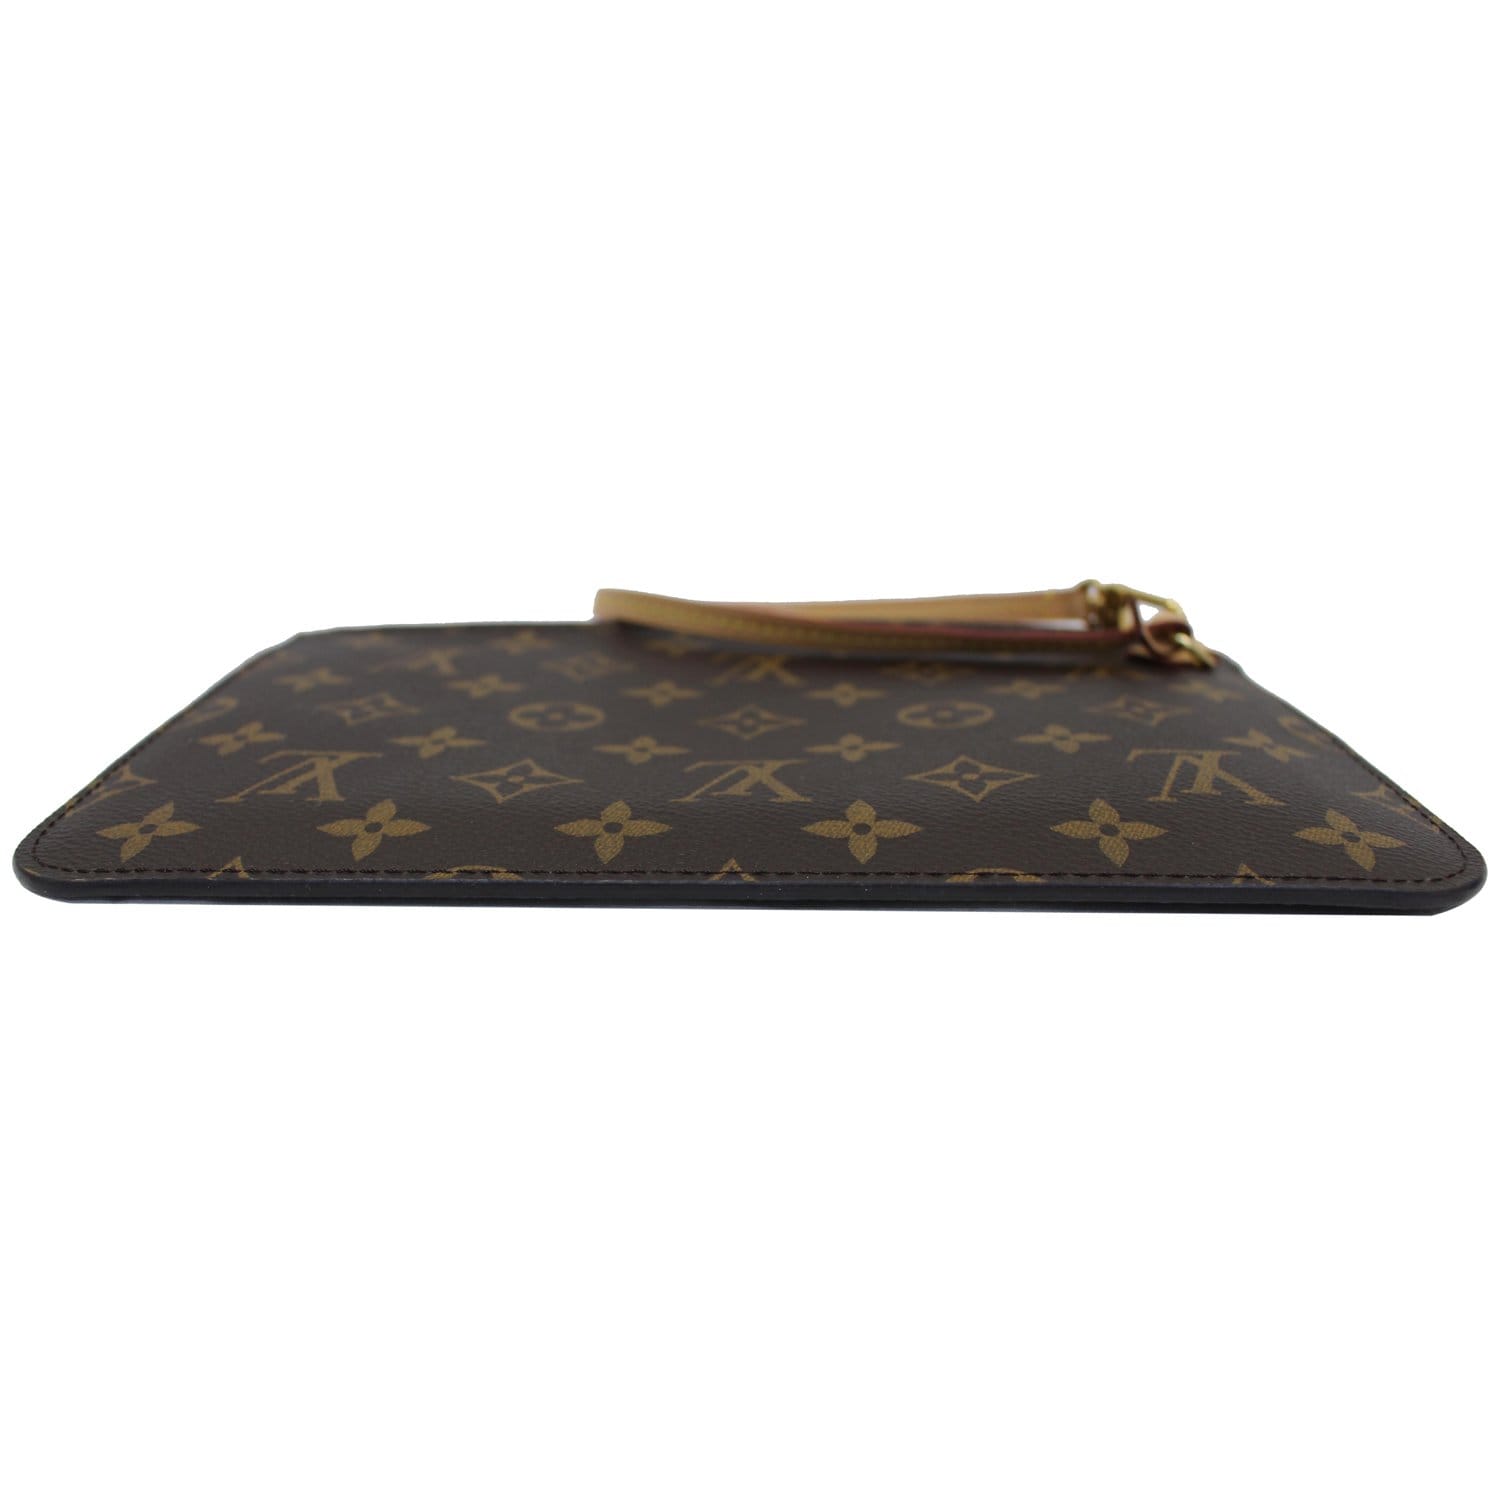 Pre - Vintage - Owned Louis Vuitton Bags for pochette - neverfull